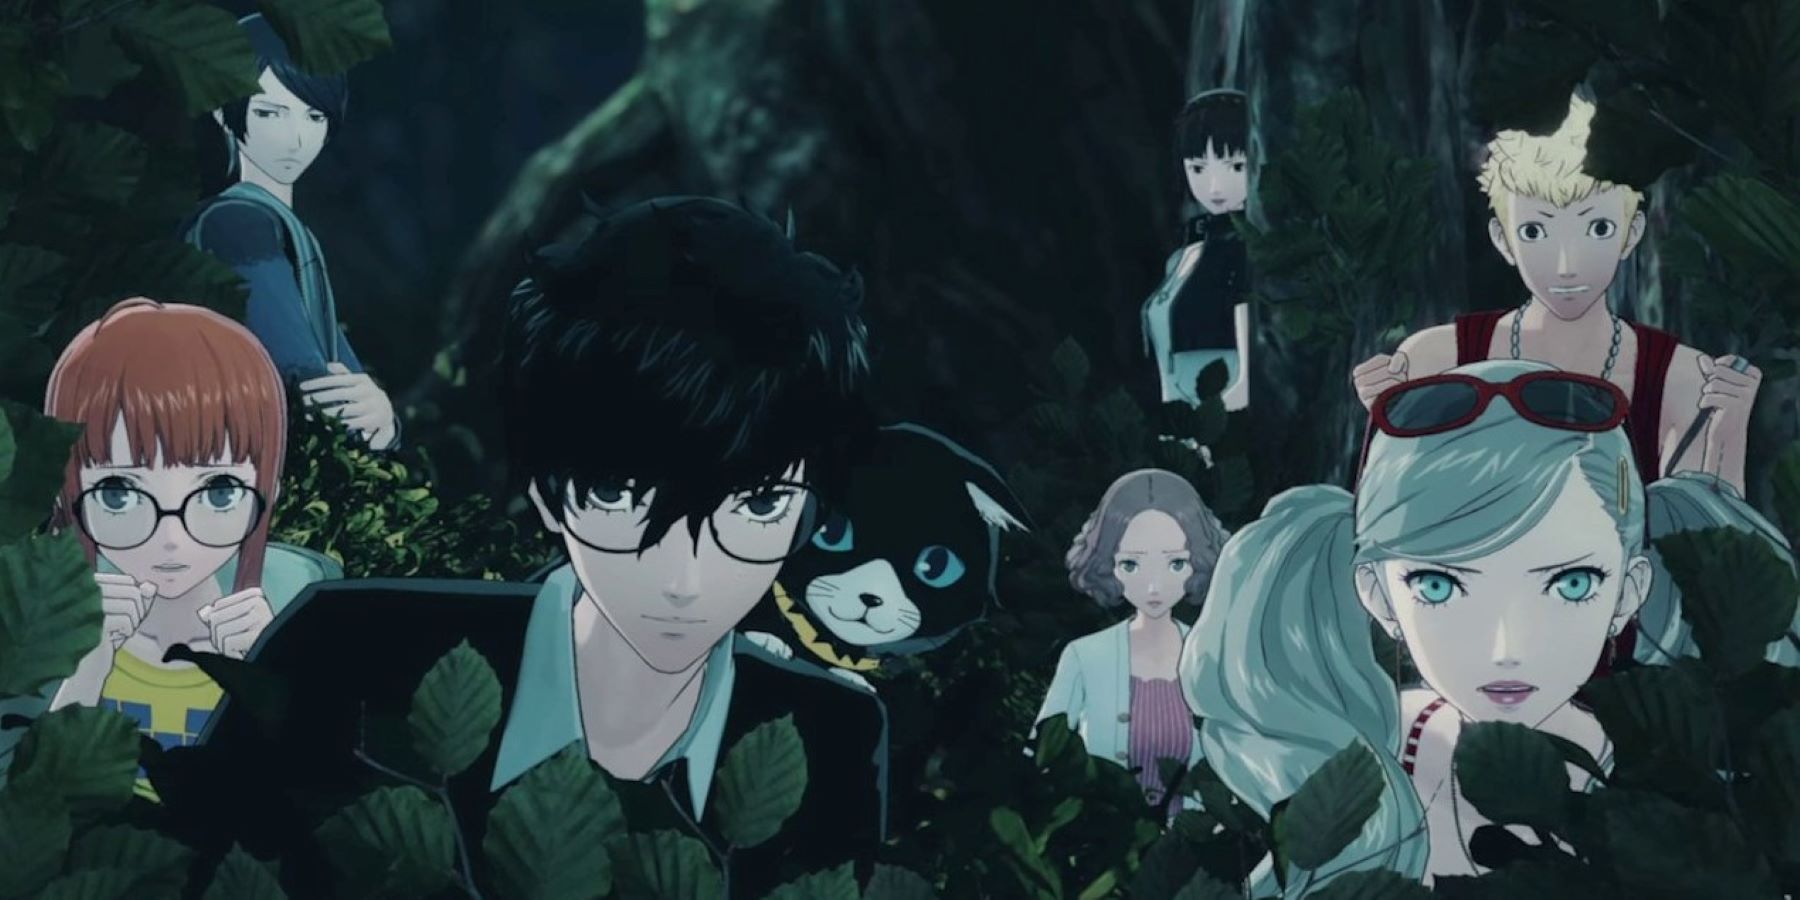 The Phantom Thieves Steal Siliconera's Heart with Another Eden x Persona 5  Royal Crossover News - Stride PR - Video Game Public Relations Agency